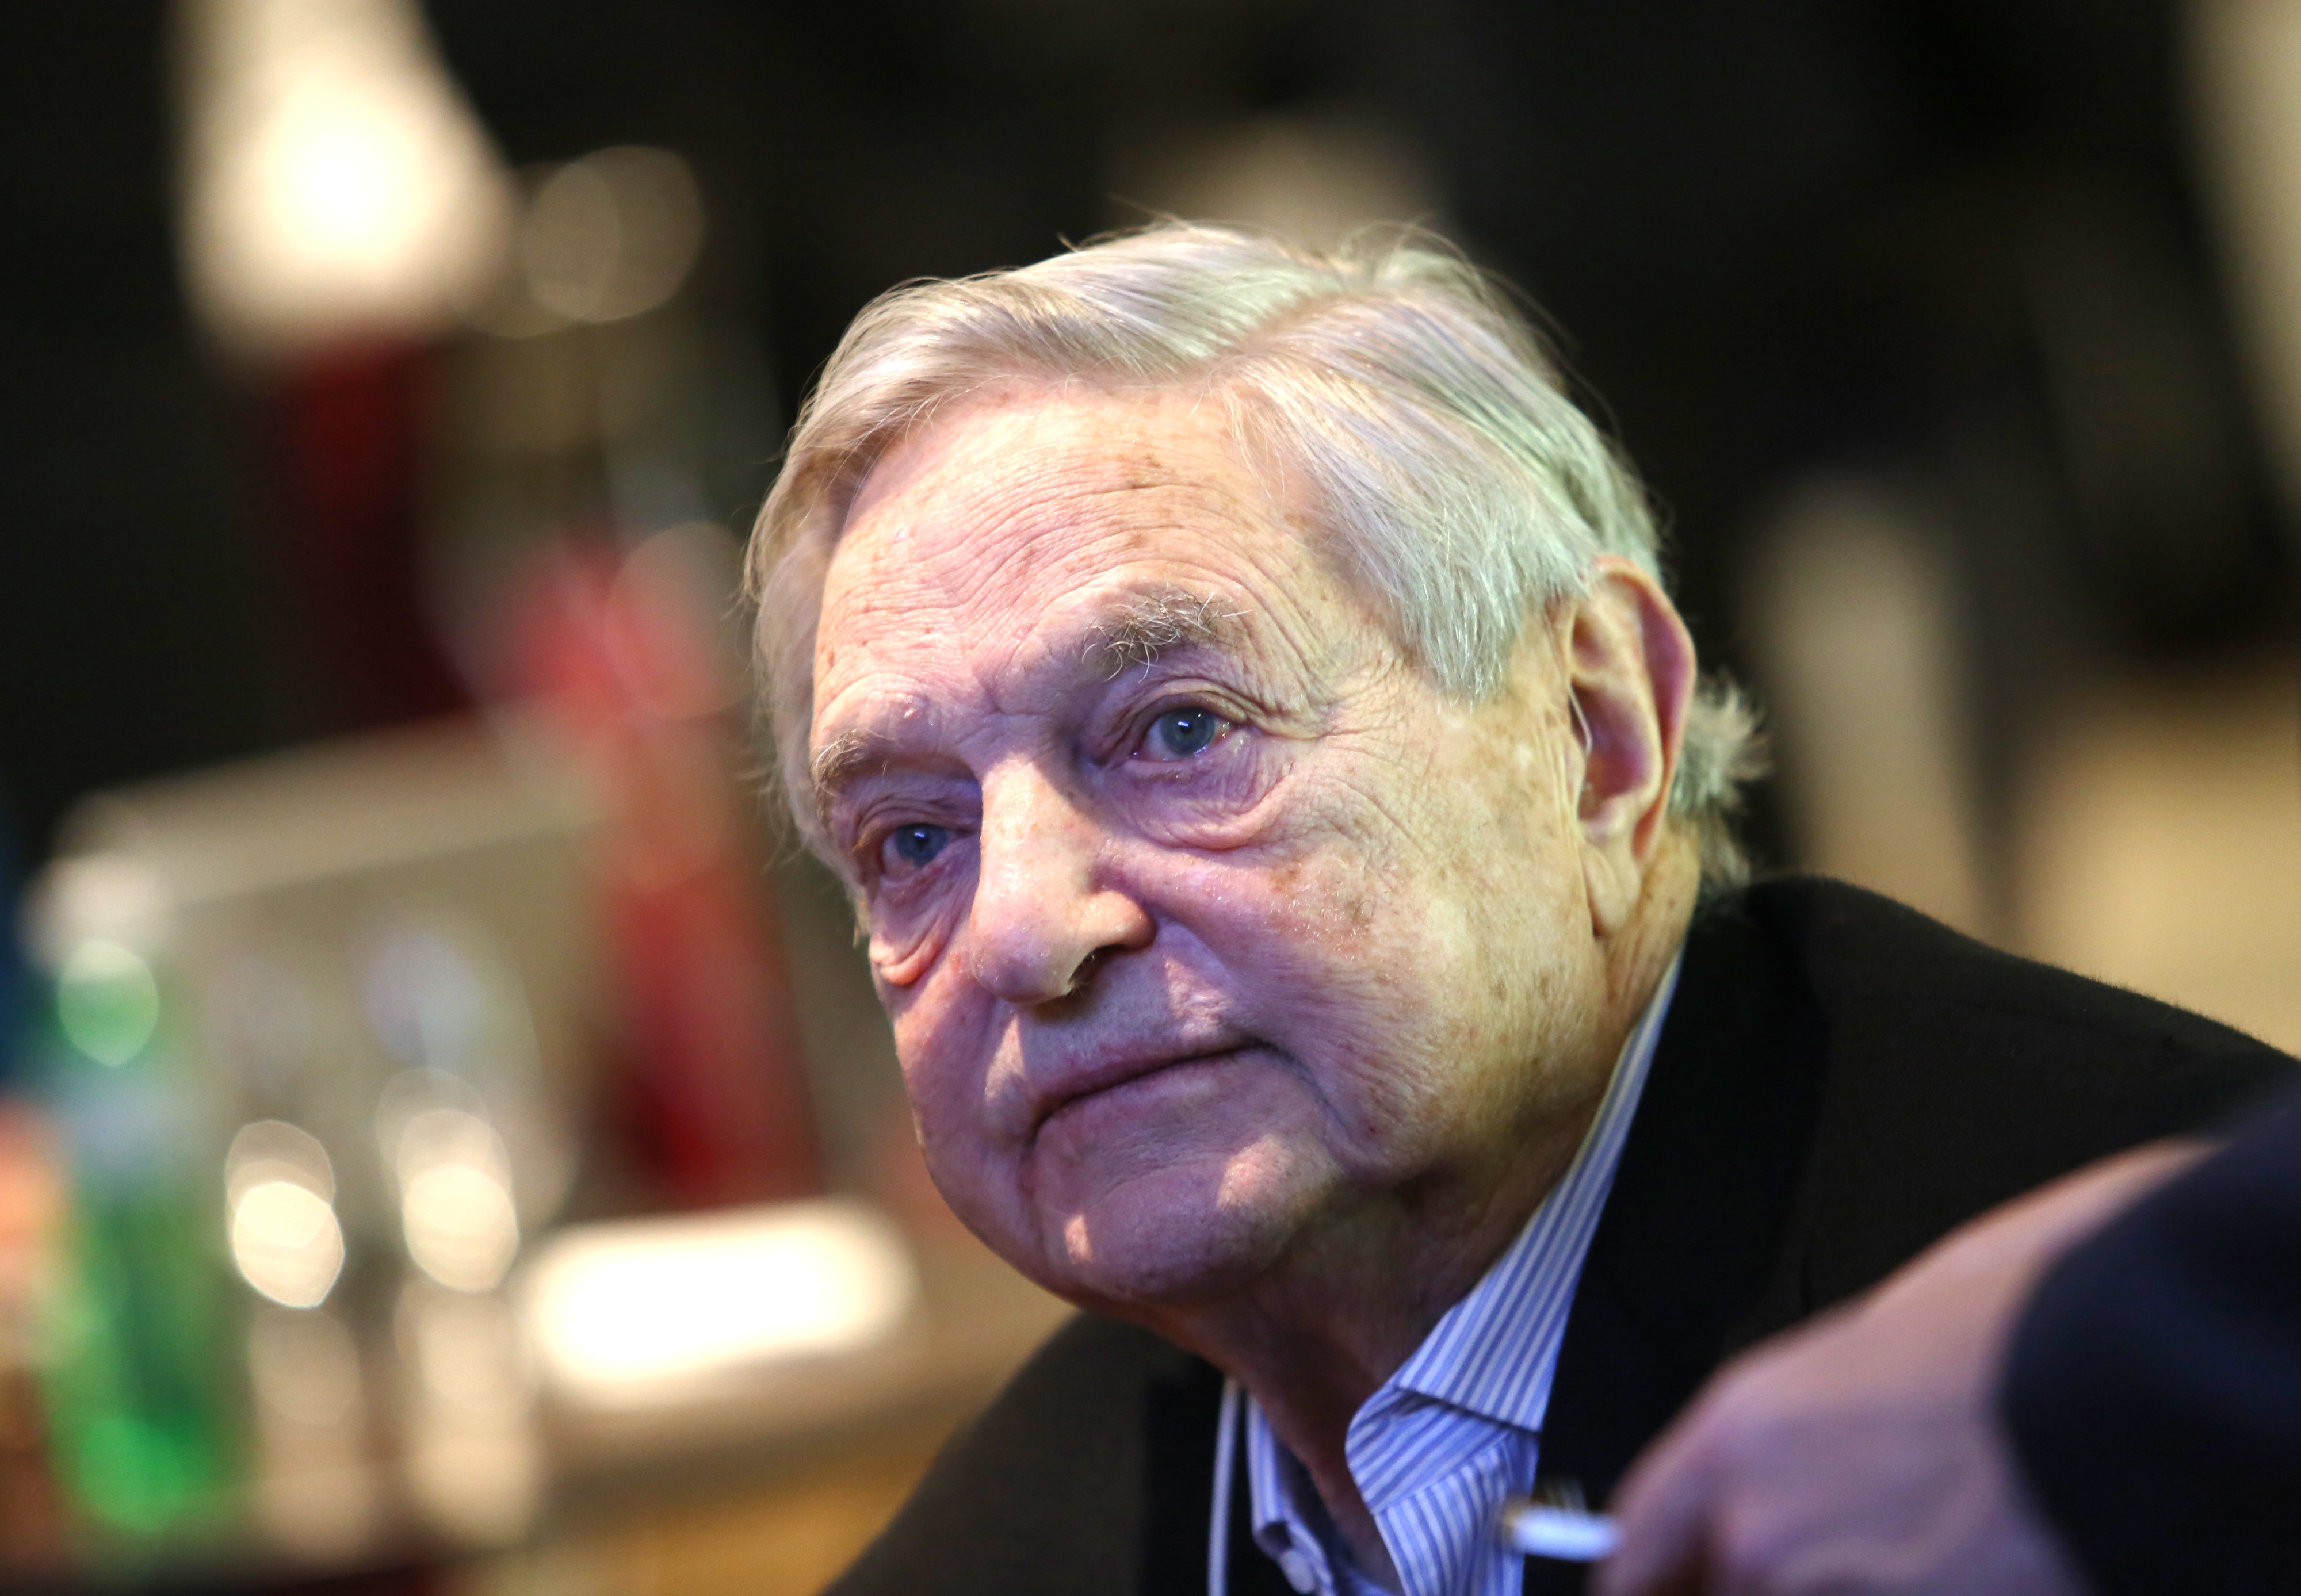 George Soros at the World Economic Forum in Davos, Switzerland, on Jan. 23, 2014 (Chris Ratcliffe—Bloomberg/Getty Images)